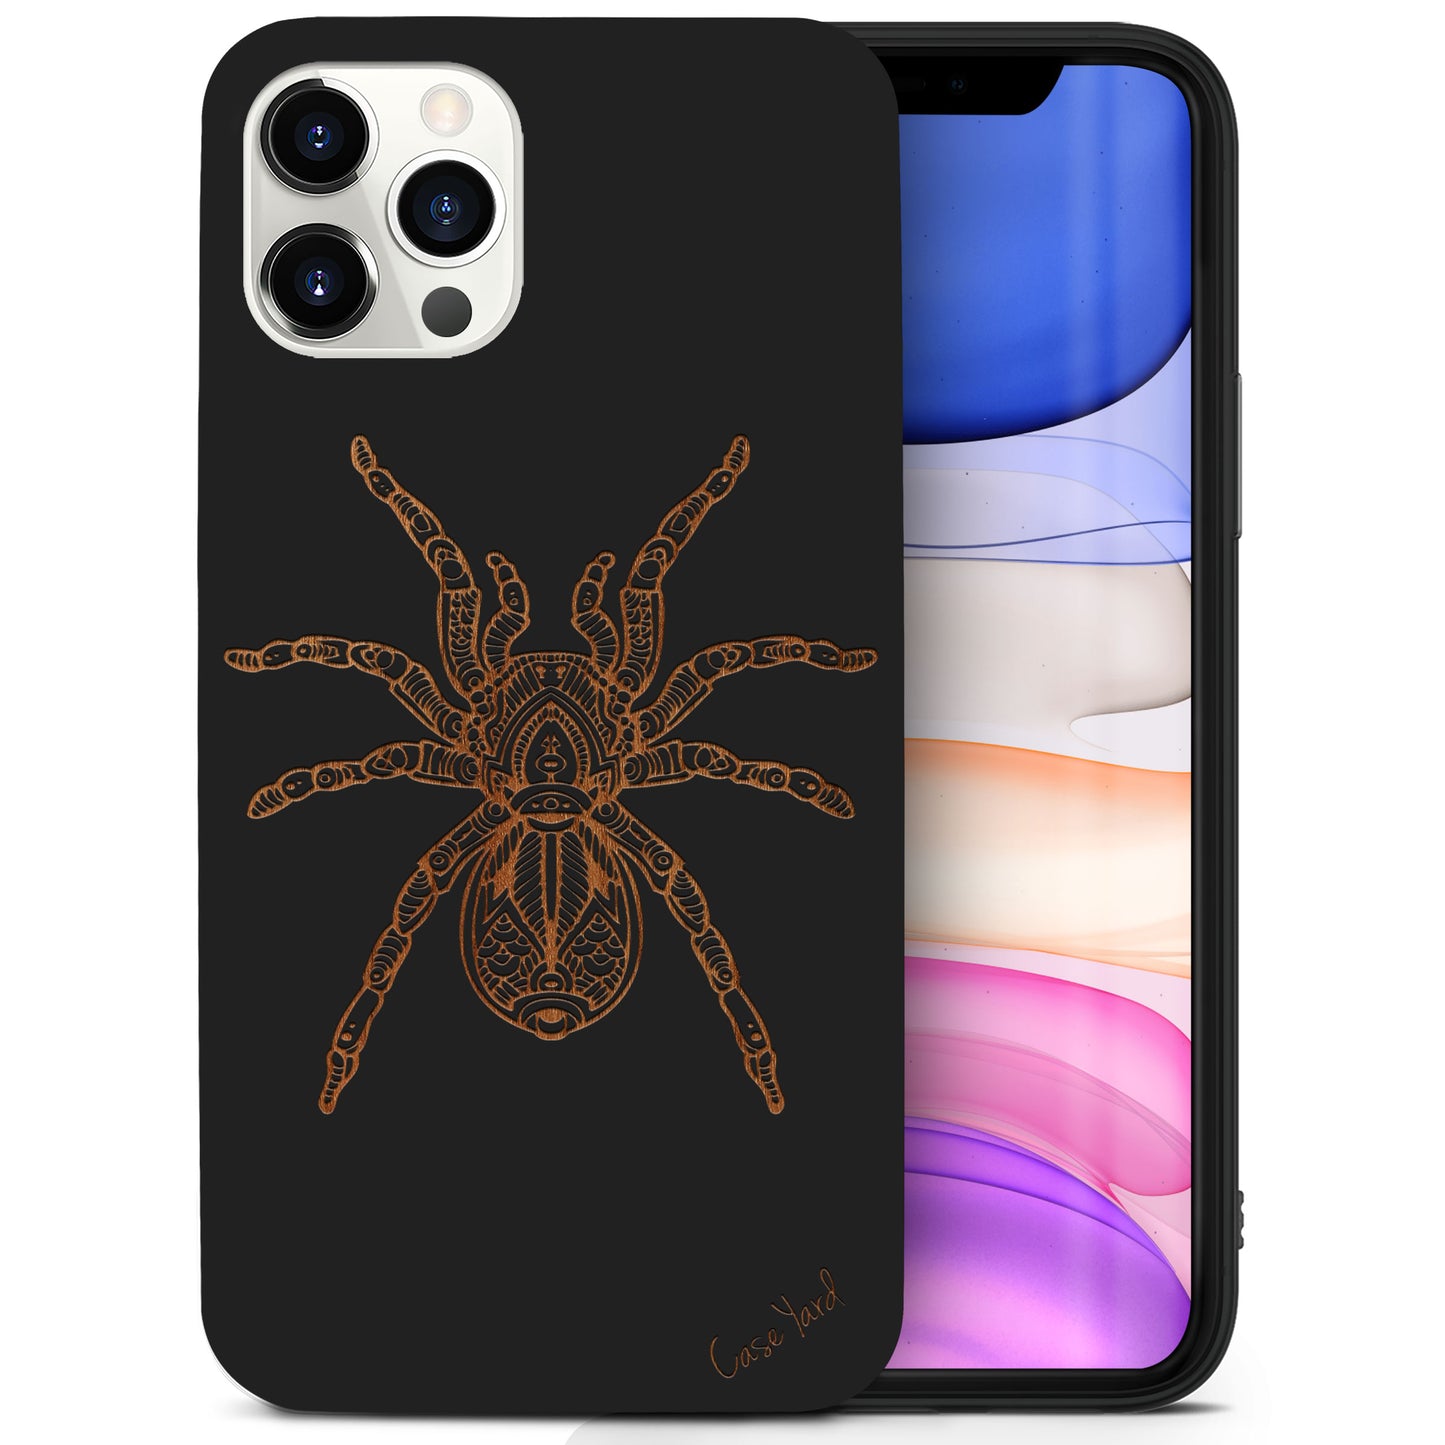 Wooden Cell Phone Case Cover, Laser Engraved case for iPhone & Samsung phone Tarantula Design